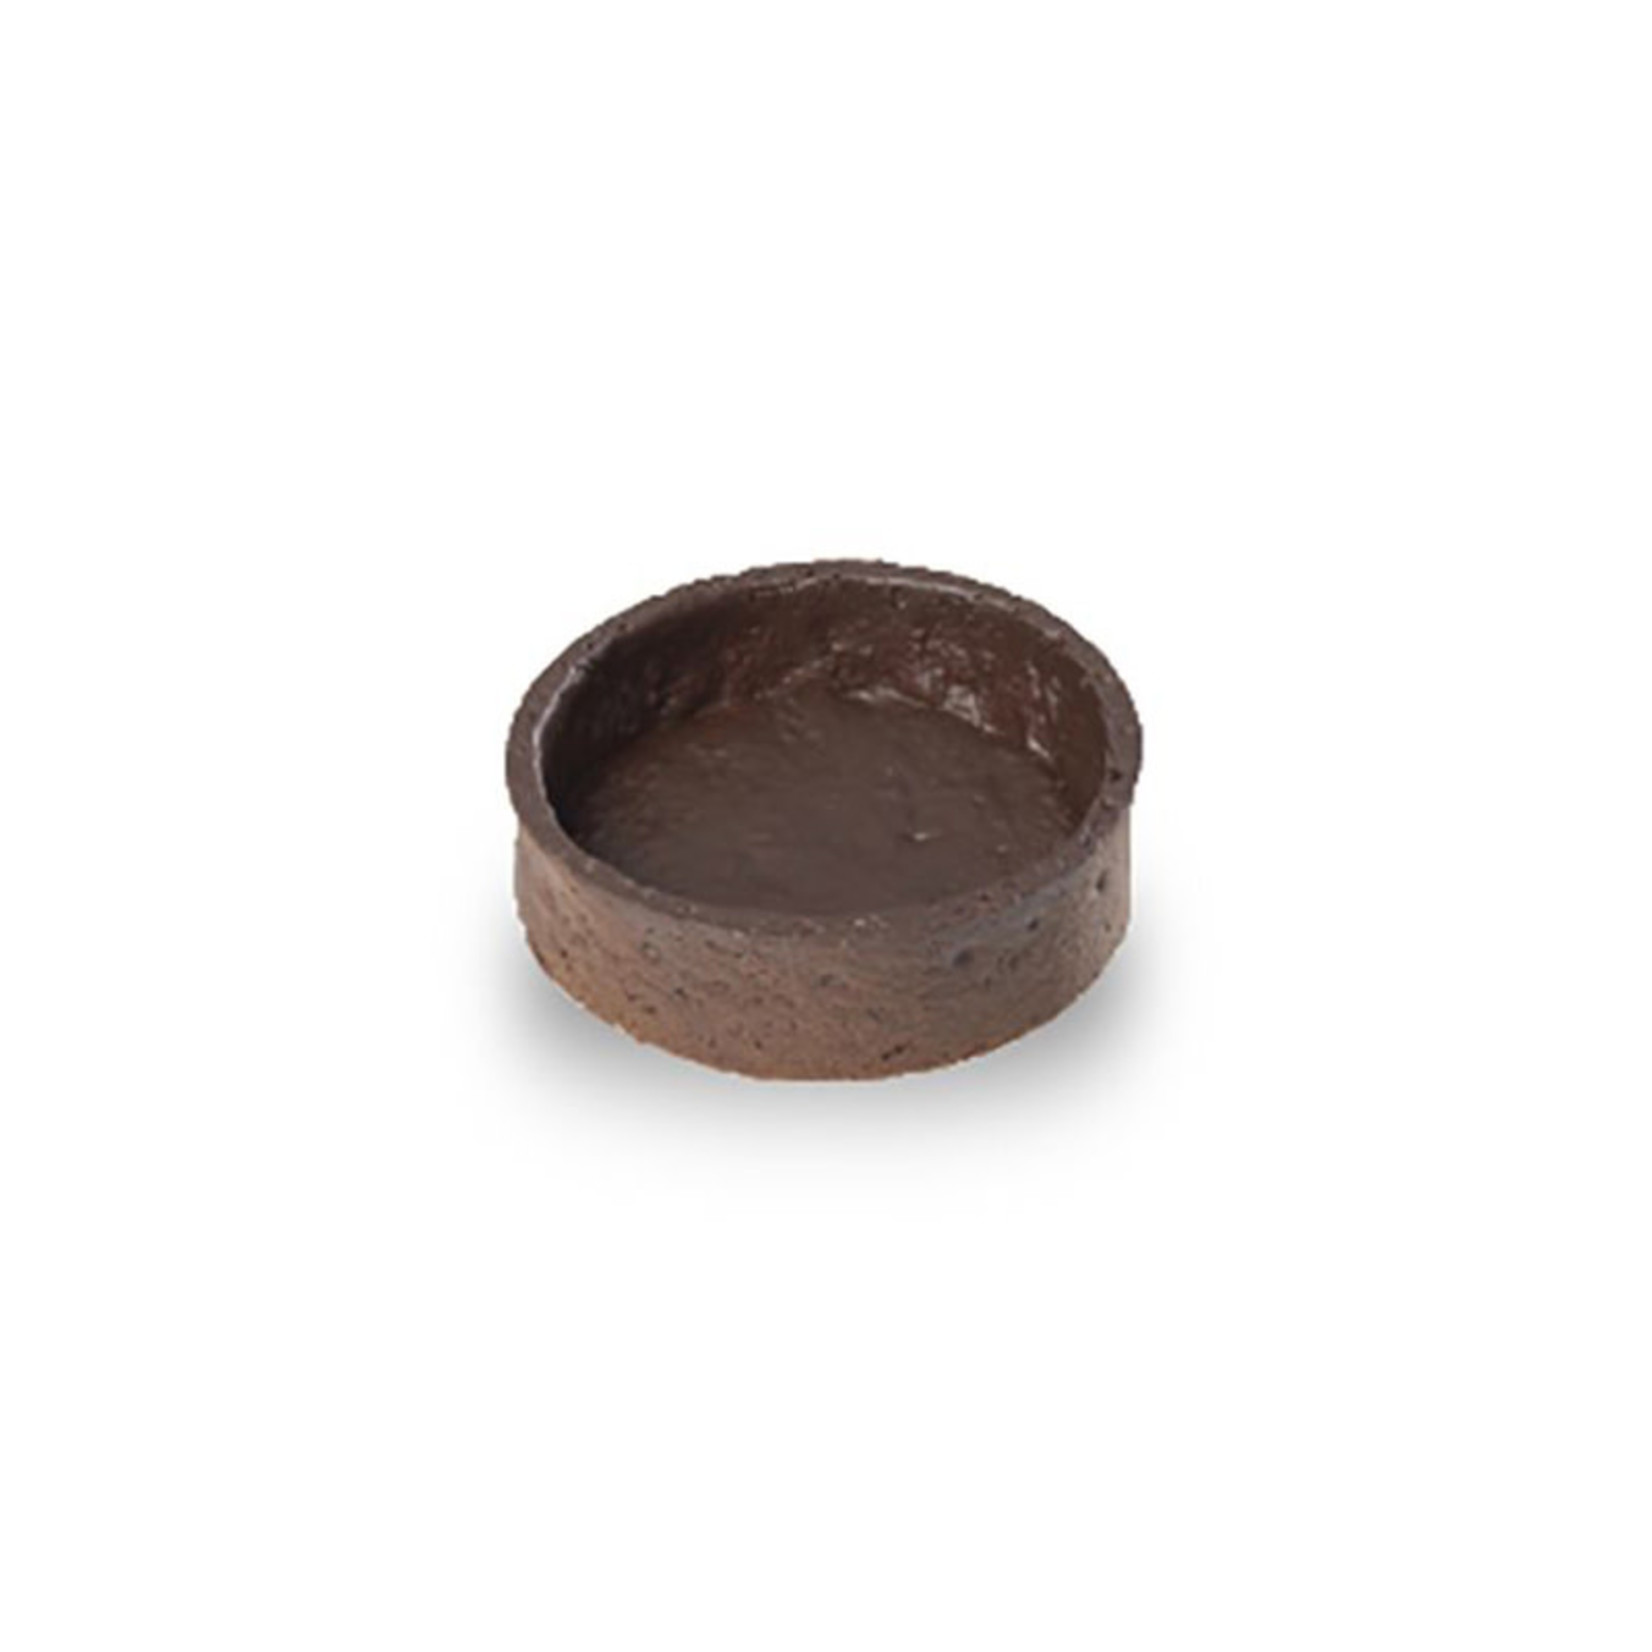 Le Chic Patissier Le Chic Patissier - Tart shell, Chocolate round - 3'' (12ct) sleeve, 79039-S